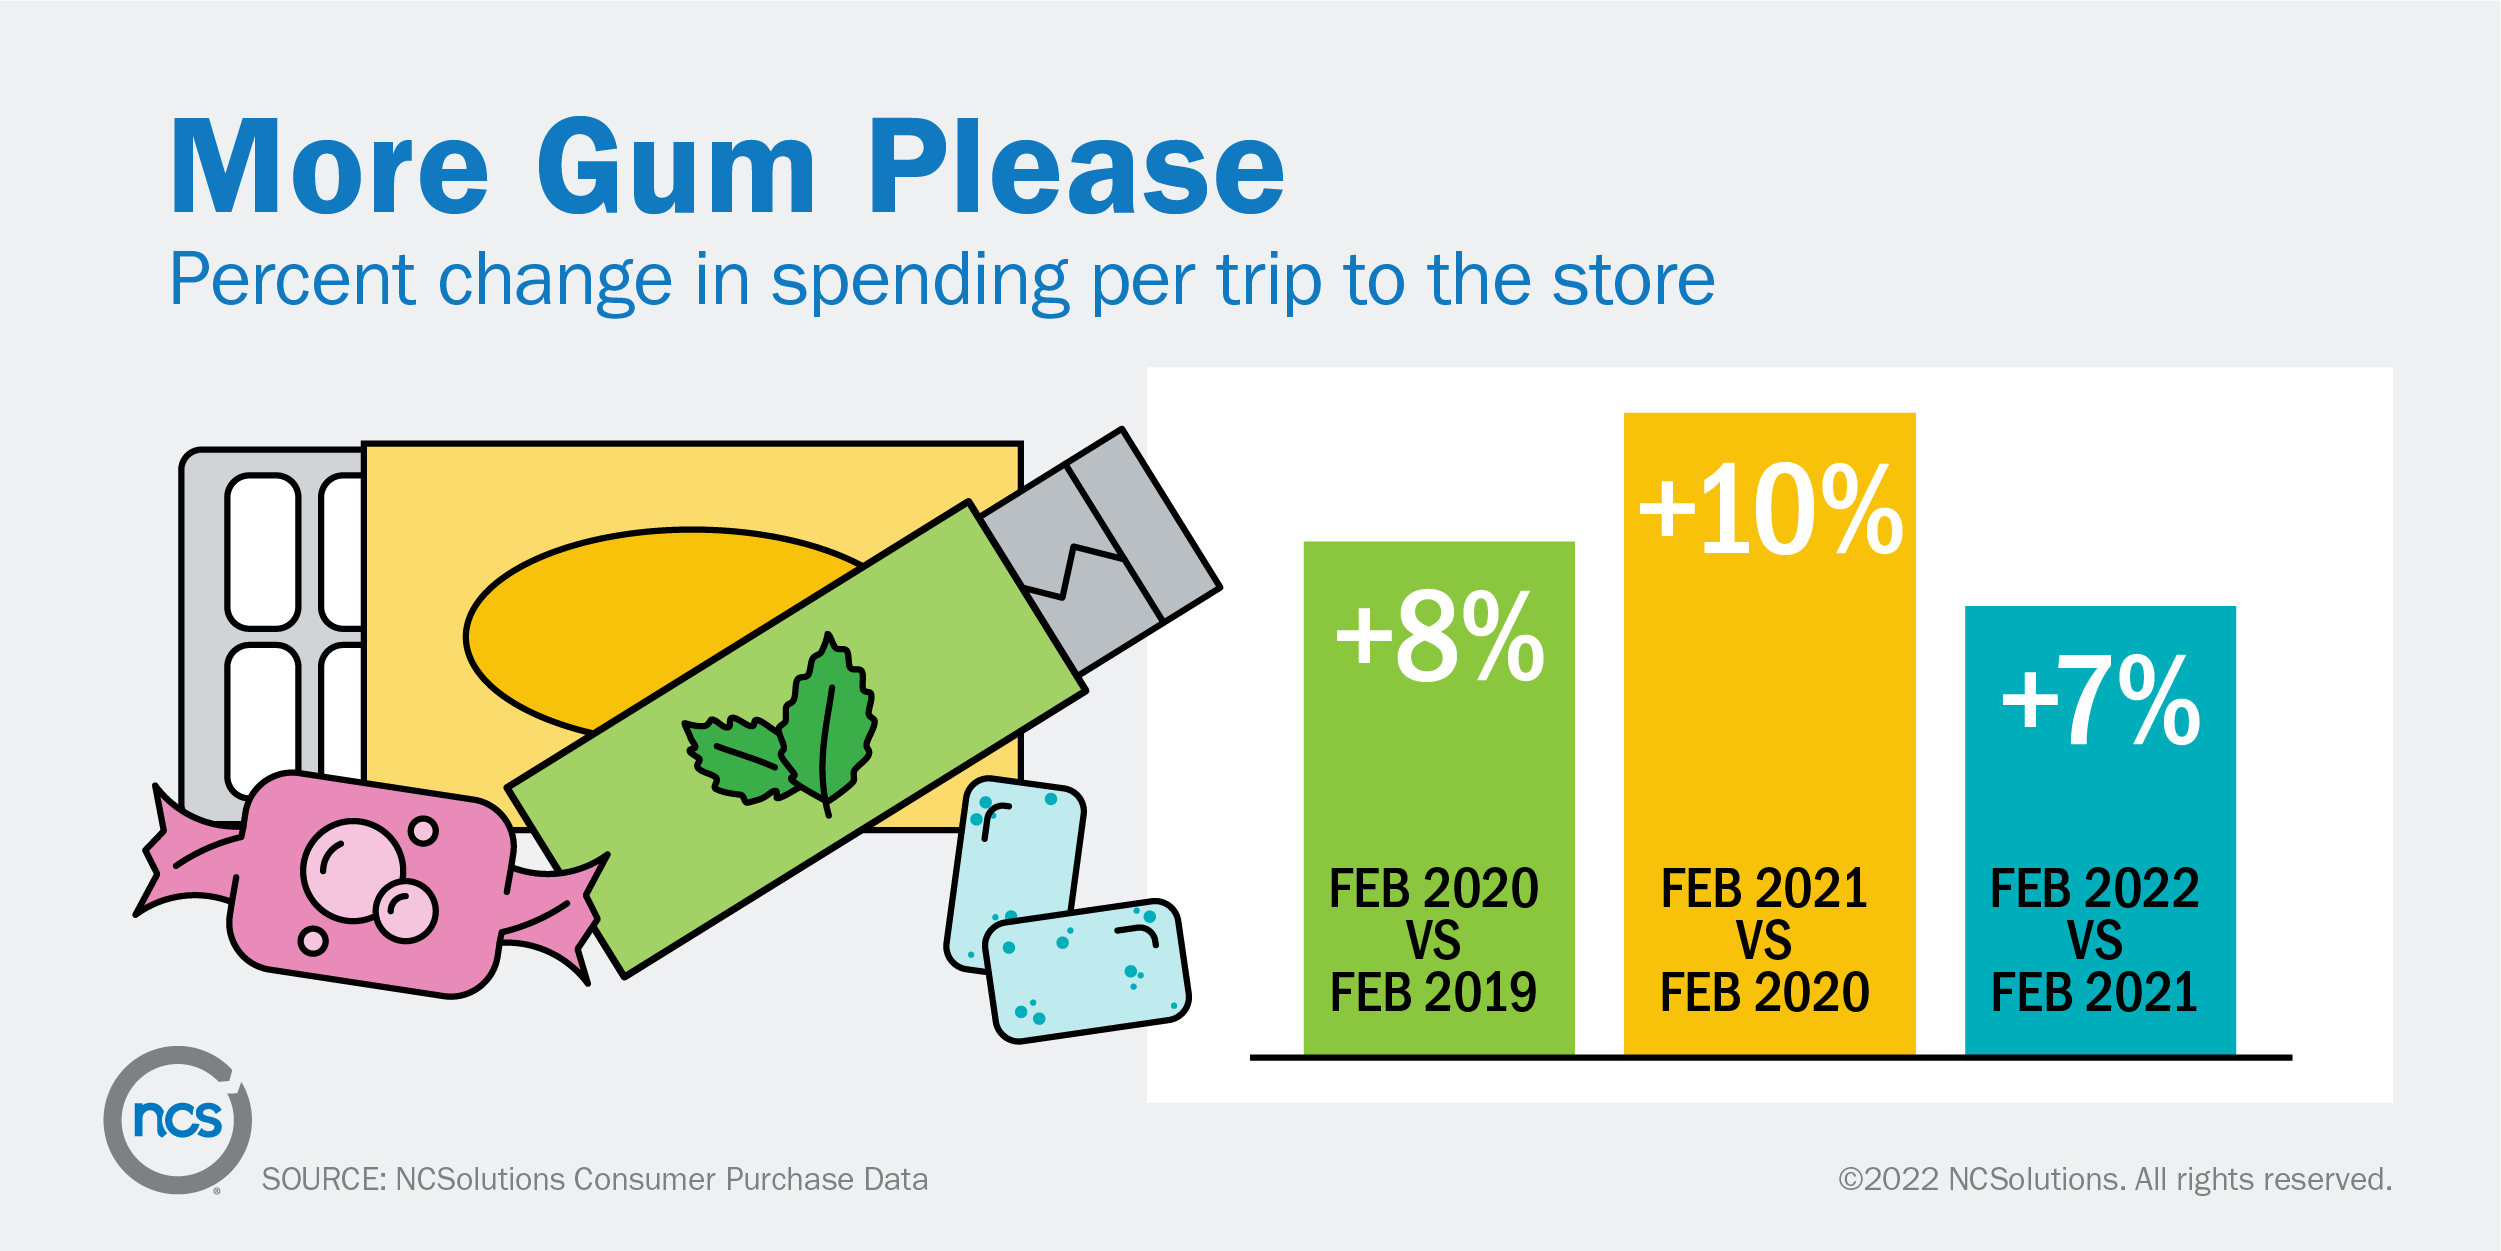 A bar chart of percentage changes in spending per trip to the store for gum.